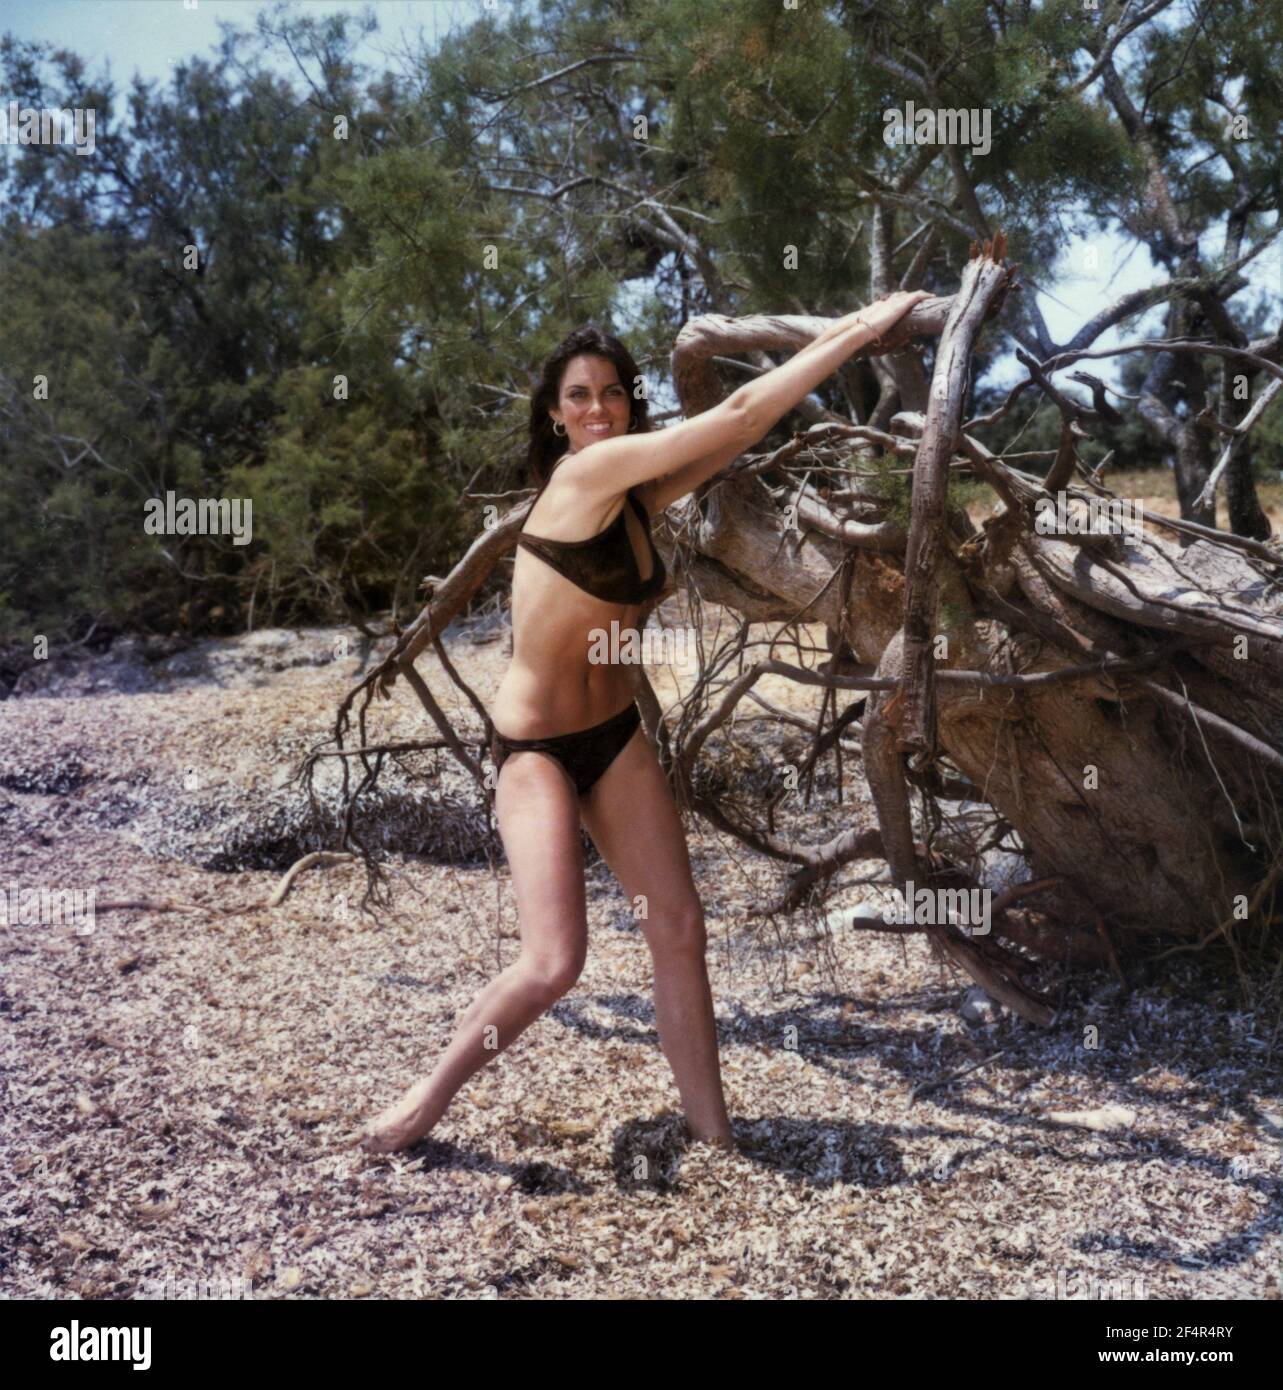 CAROLINE MUNRO Bikini Pin Up Portrait on location during filming of THE GOLDEN VOYAGE OF SINBAD 1973 director STUART HESSLER producers Ray Harryhausen and Charles H. Schneer  Ameran Films / Morningside Productions / Columbia Pictures Stock Photo